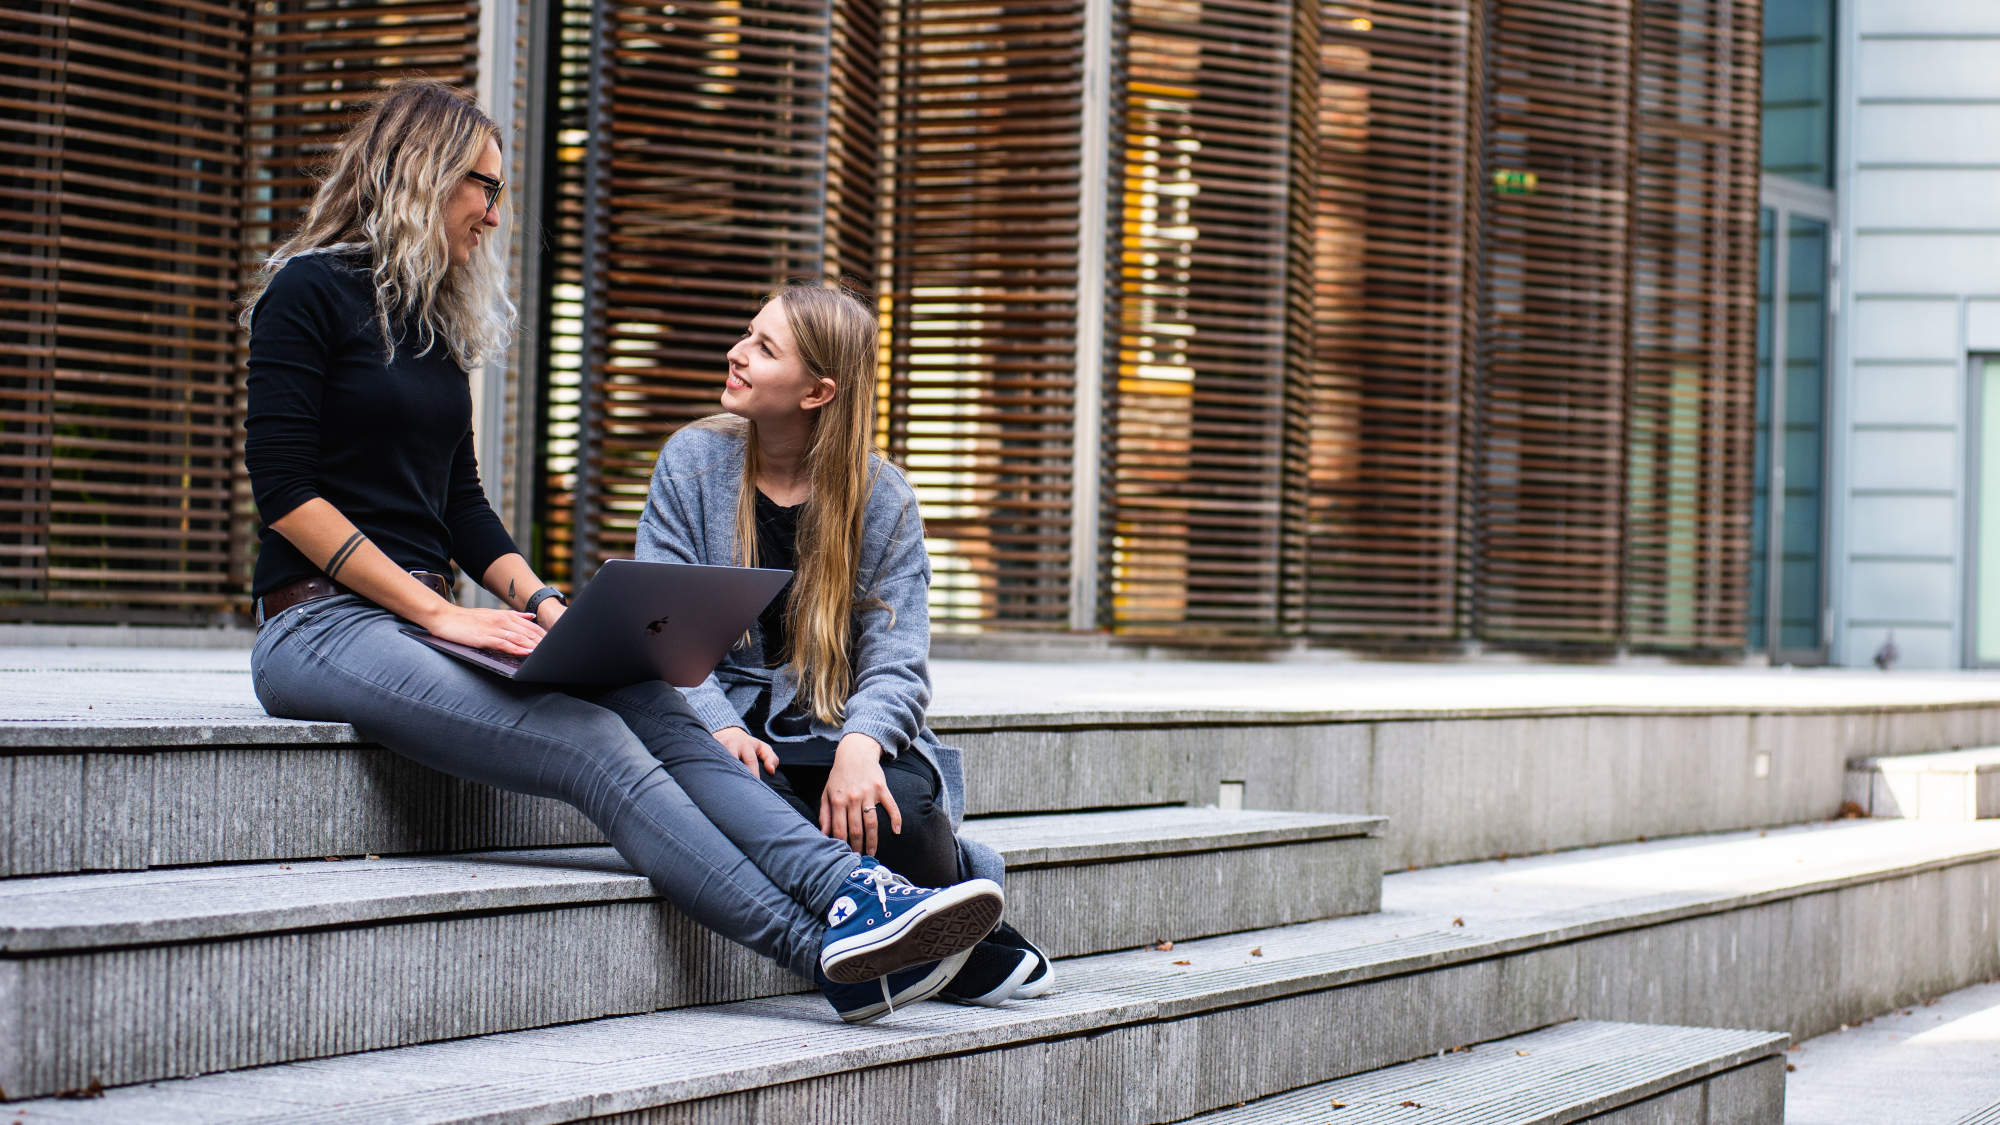 Two women sitting on stairs in front of a building and talking.